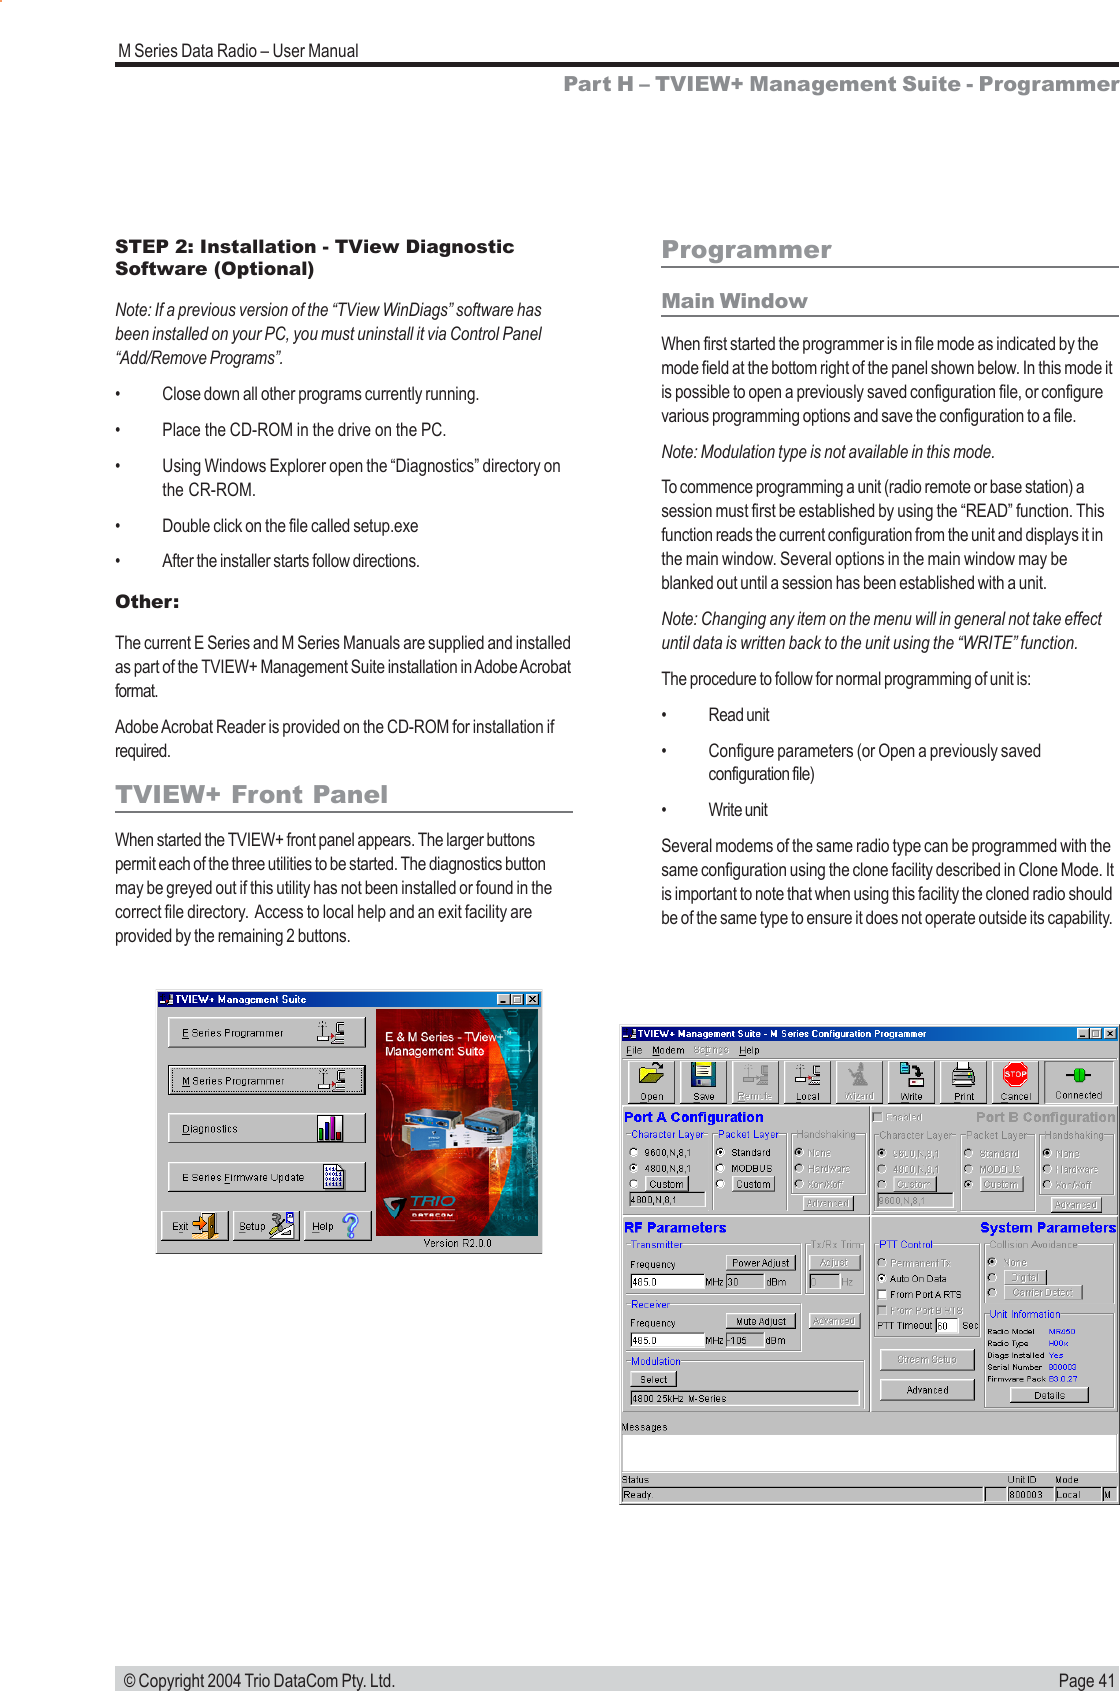 Page 41M Series Data Radio – User Manual © Copyright 2004 Trio DataCom Pty. Ltd.ProgrammerMain WindowWhen first started the programmer is in file mode as indicated by themode field at the bottom right of the panel shown below. In this mode itis possible to open a previously saved configuration file, or configurevarious programming options and save the configuration to a file.Note: Modulation type is not available in this mode.To commence programming a unit (radio remote or base station) asession must first be established by using the “READ” function. Thisfunction reads the current configuration from the unit and displays it inthe main window. Several options in the main window may beblanked out until a session has been established with a unit.Note: Changing any item on the menu will in general not take effectuntil data is written back to the unit using the “WRITE” function.The procedure to follow for normal programming of unit is:• Read unit• Configure parameters (or Open a previously savedconfiguration file)• Write unitSeveral modems of the same radio type can be programmed with thesame configuration using the clone facility described in Clone Mode. Itis important to note that when using this facility the cloned radio shouldbe of the same type to ensure it does not operate outside its capability.Part H – TVIEW+ Management Suite - ProgrammerSTEP 2: Installation - TView DiagnosticSoftware (Optional)Note: If a previous version of the “TView WinDiags” software hasbeen installed on your PC, you must uninstall it via Control Panel“Add/Remove Programs”.• Close down all other programs currently running.• Place the CD-ROM in the drive on the PC.• Using Windows Explorer open the “Diagnostics” directory onthe CR-ROM.• Double click on the file called setup.exe• After the installer starts follow directions.Other:The current E Series and M Series Manuals are supplied and installedas part of the TVIEW+ Management Suite installation in Adobe Acrobatformat.Adobe Acrobat Reader is provided on the CD-ROM for installation ifrequired.TVIEW+ Front PanelWhen started the TVIEW+ front panel appears. The larger buttonspermit each of the three utilities to be started. The diagnostics buttonmay be greyed out if this utility has not been installed or found in thecorrect file directory.  Access to local help and an exit facility areprovided by the remaining 2 buttons.